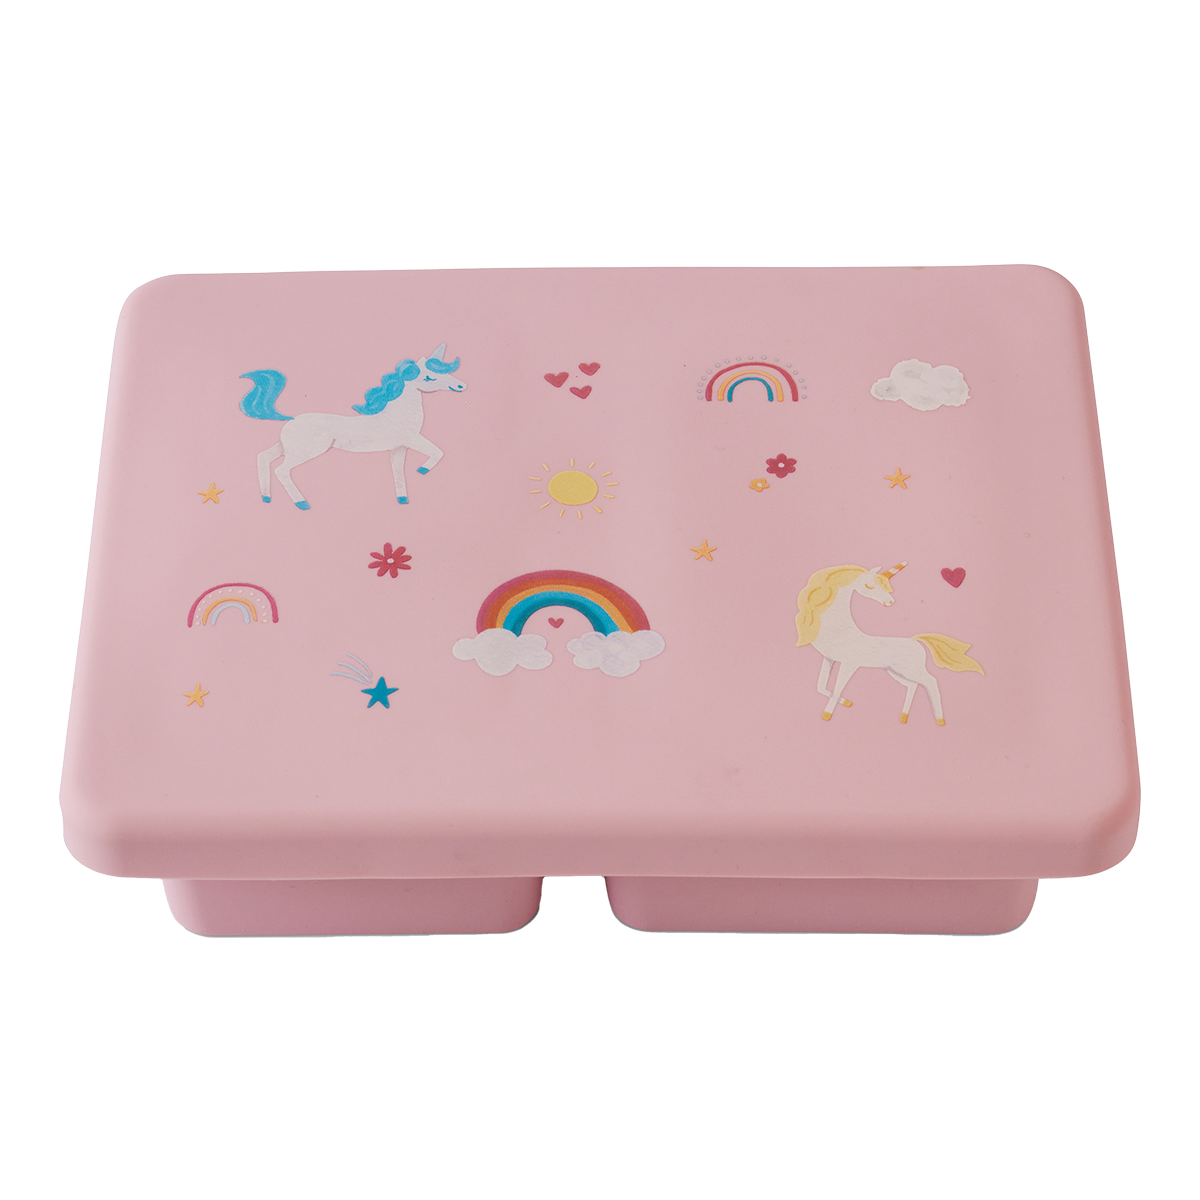 pink lunch bento box with three compartments in unicorn print